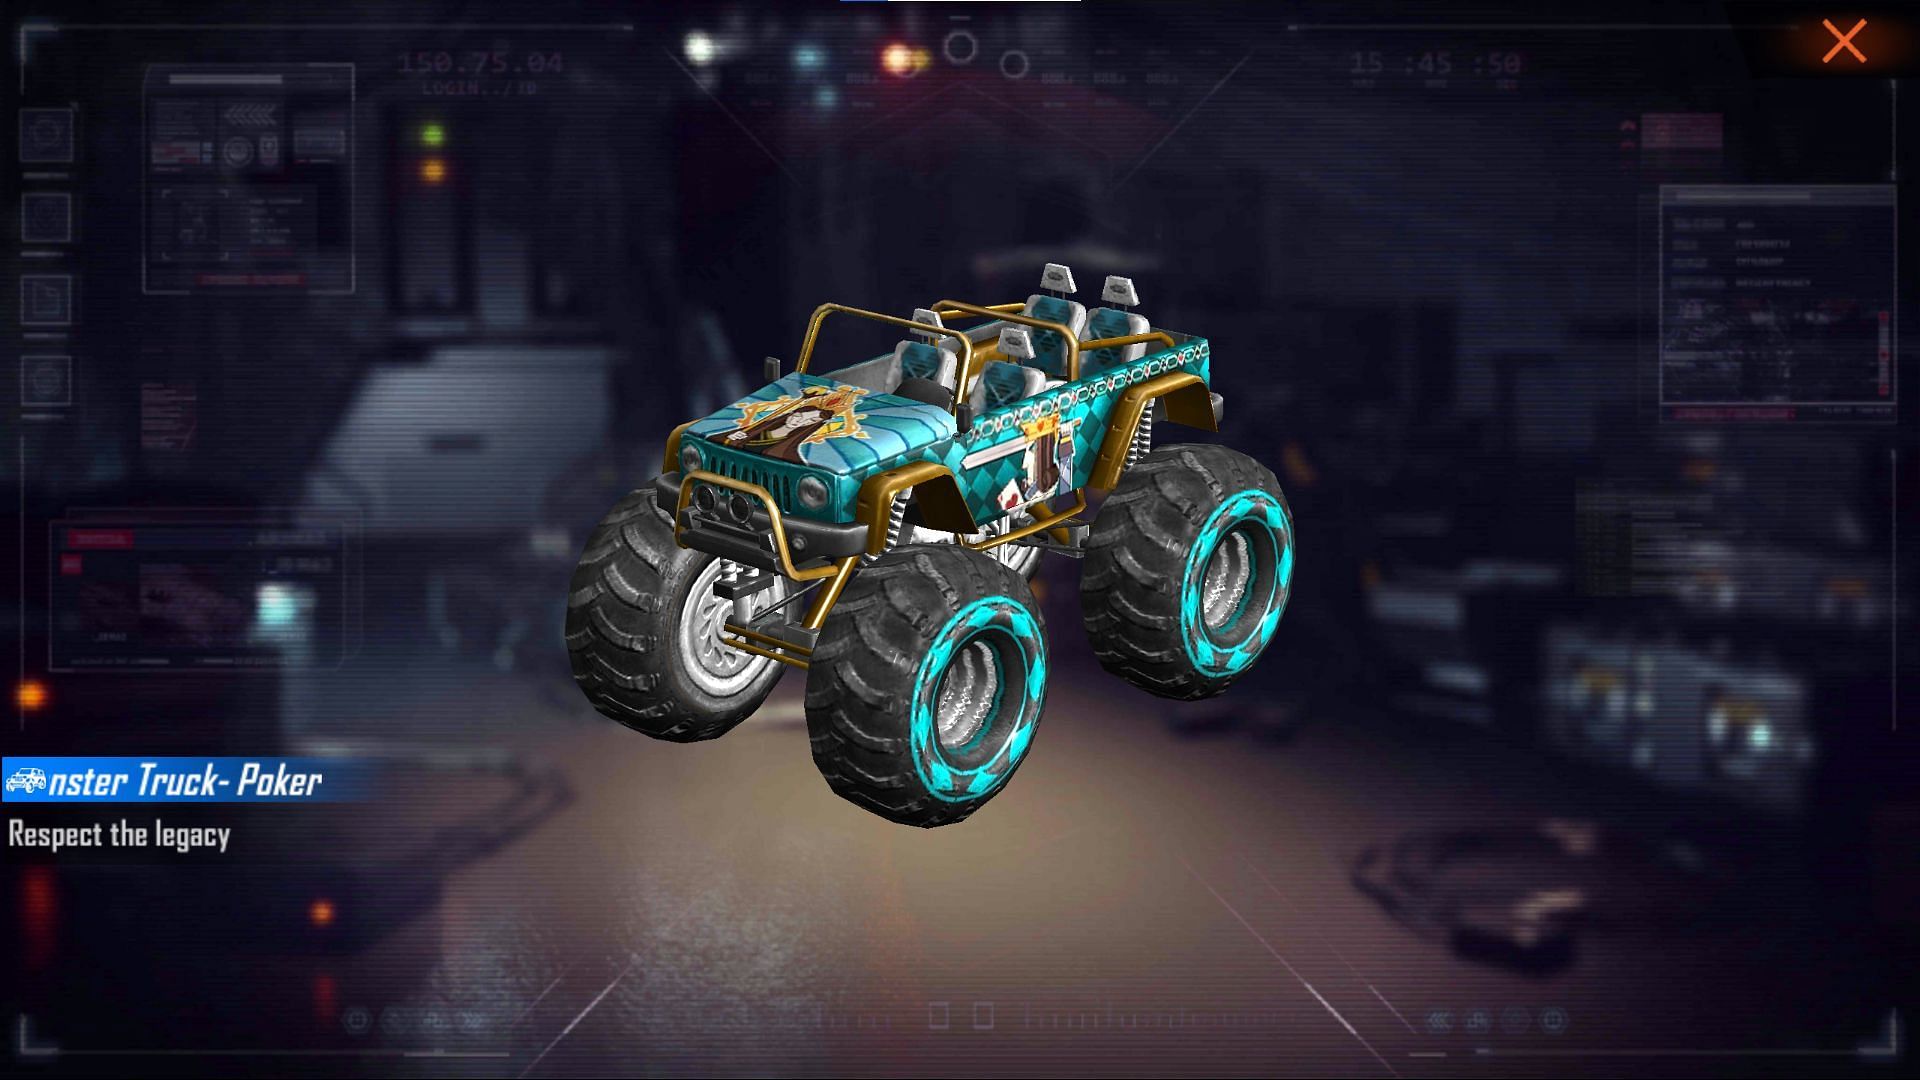 The Monster Truck skin in Free Fire (Image via Free Fire)